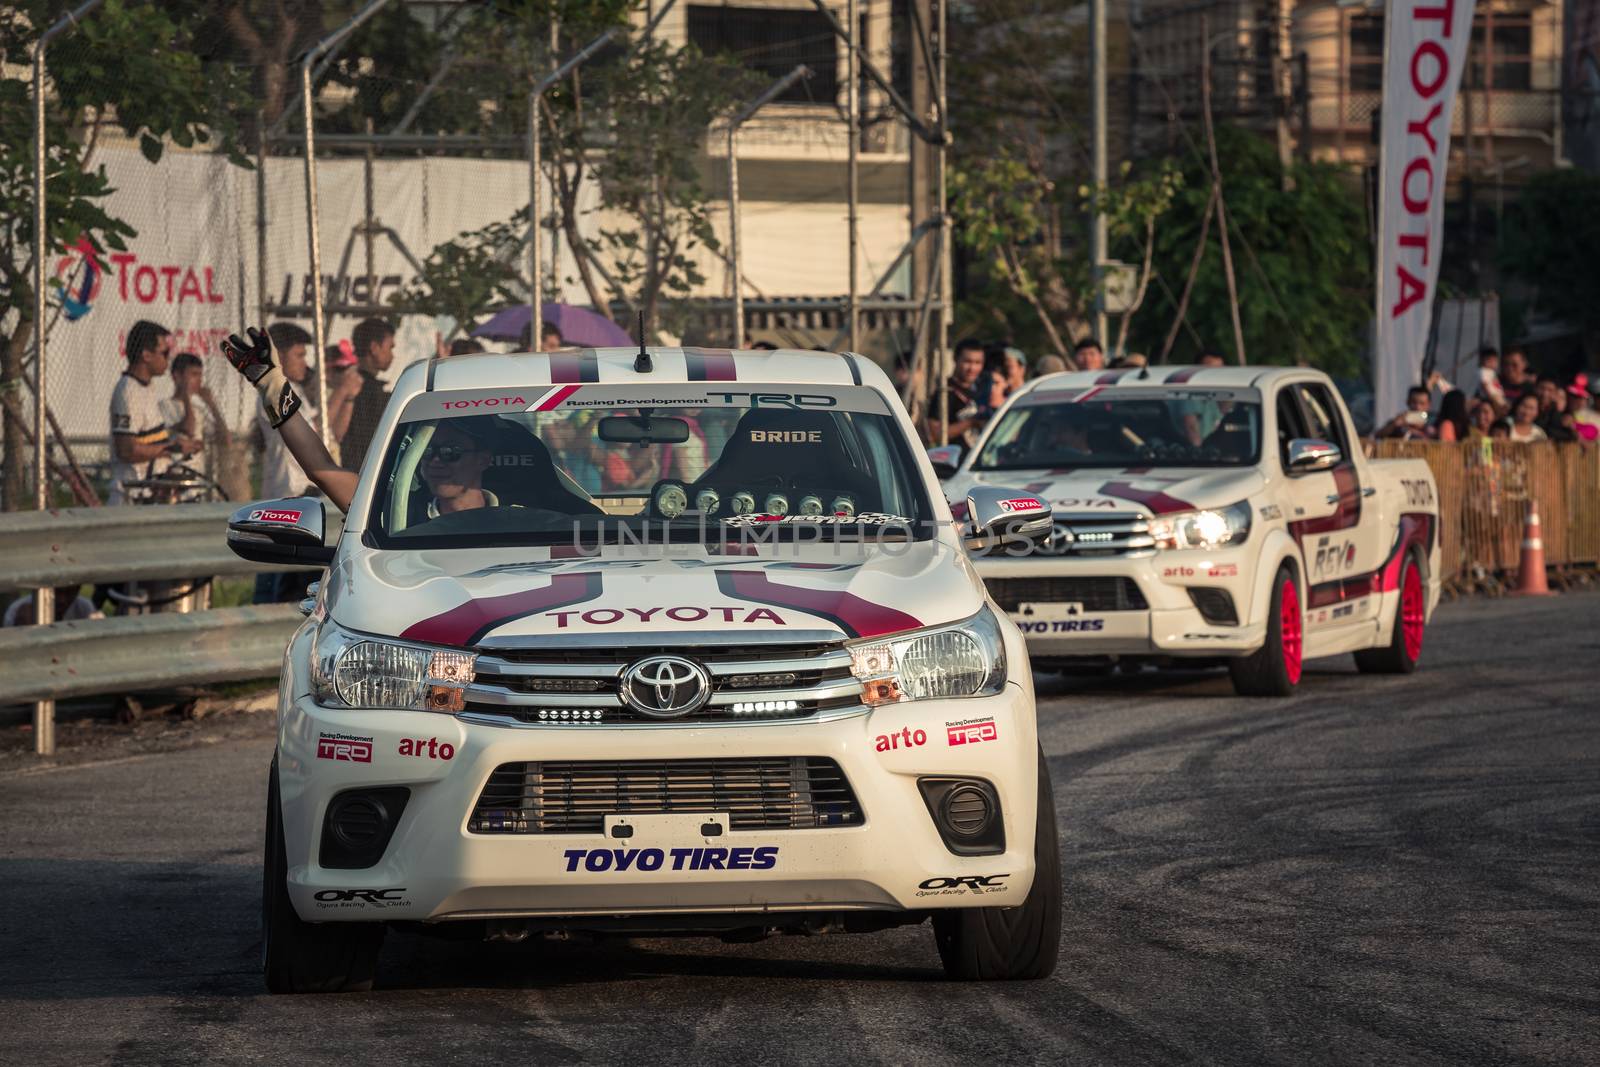 Udon Thani, Thailand - October 18, 2015: Techapol Toyingchareon the driver of Toyota Hilux Revo waving hand to the audiences after drifting contest on the track between driver from Thailand and Japan at the event Toyota Motor Sport show at Udon Thani, Thailand